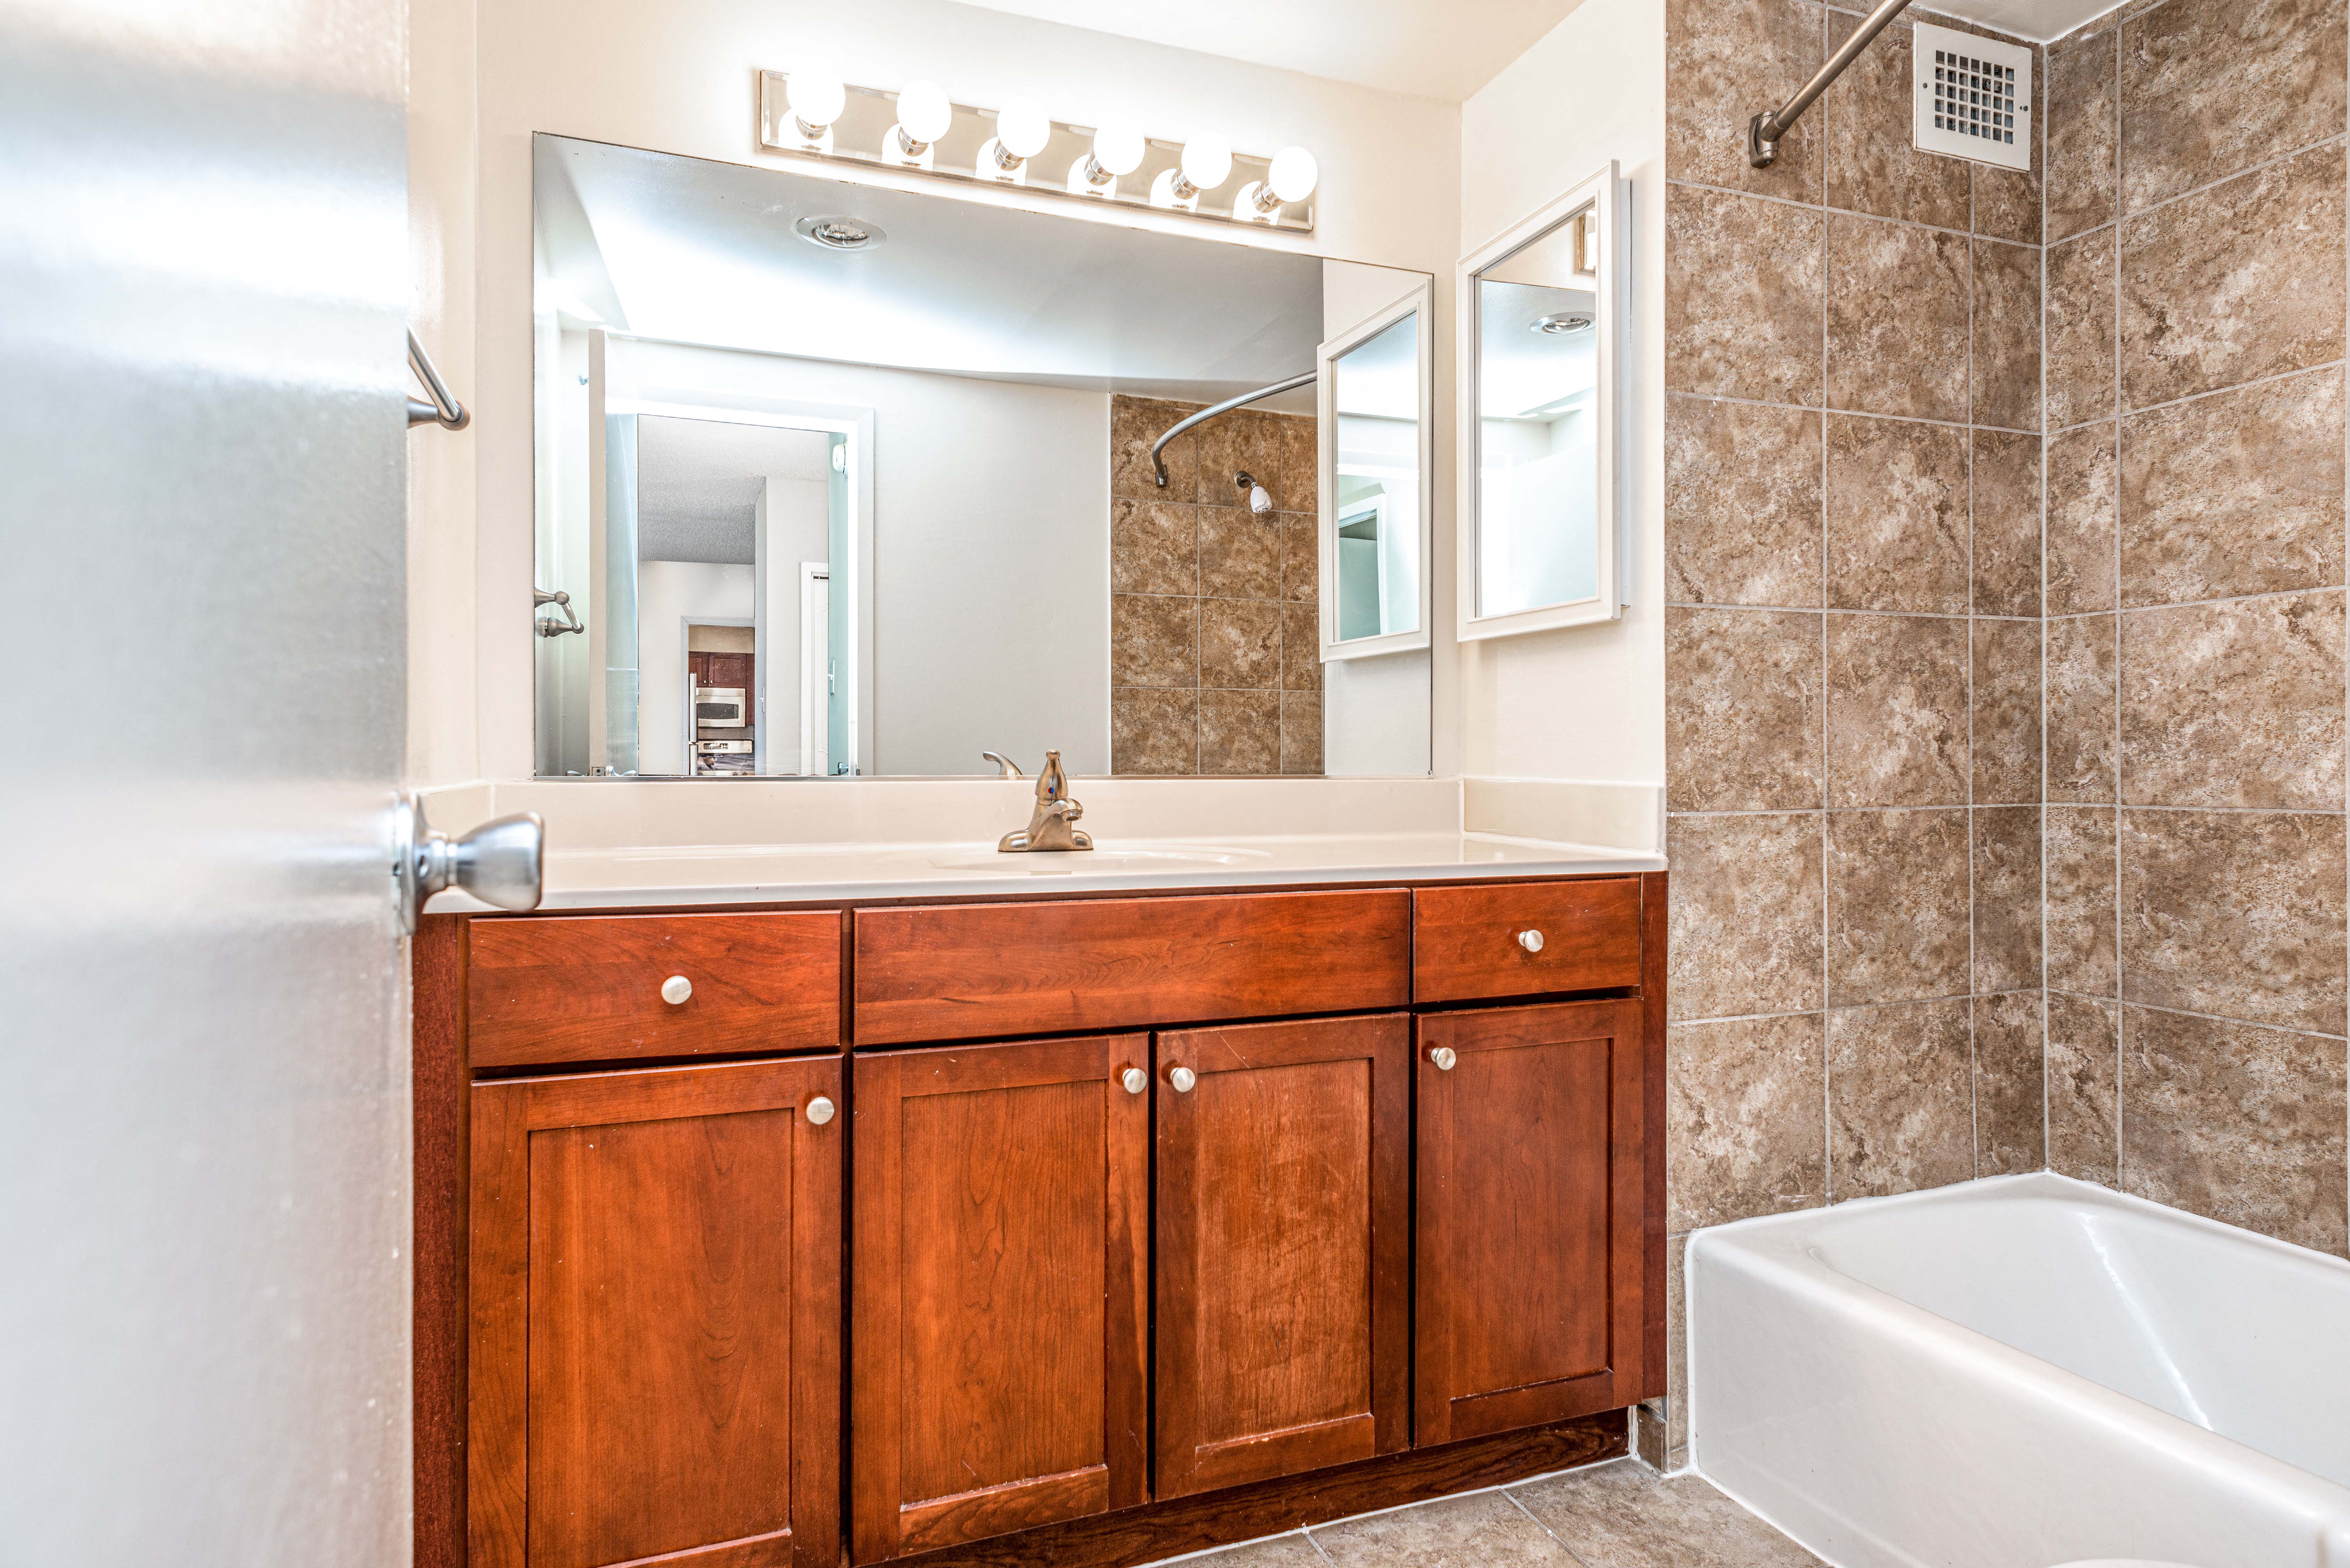 Updated bathrooms with tiled bathroom shower and tub, cherry maple vanity and premier lighting